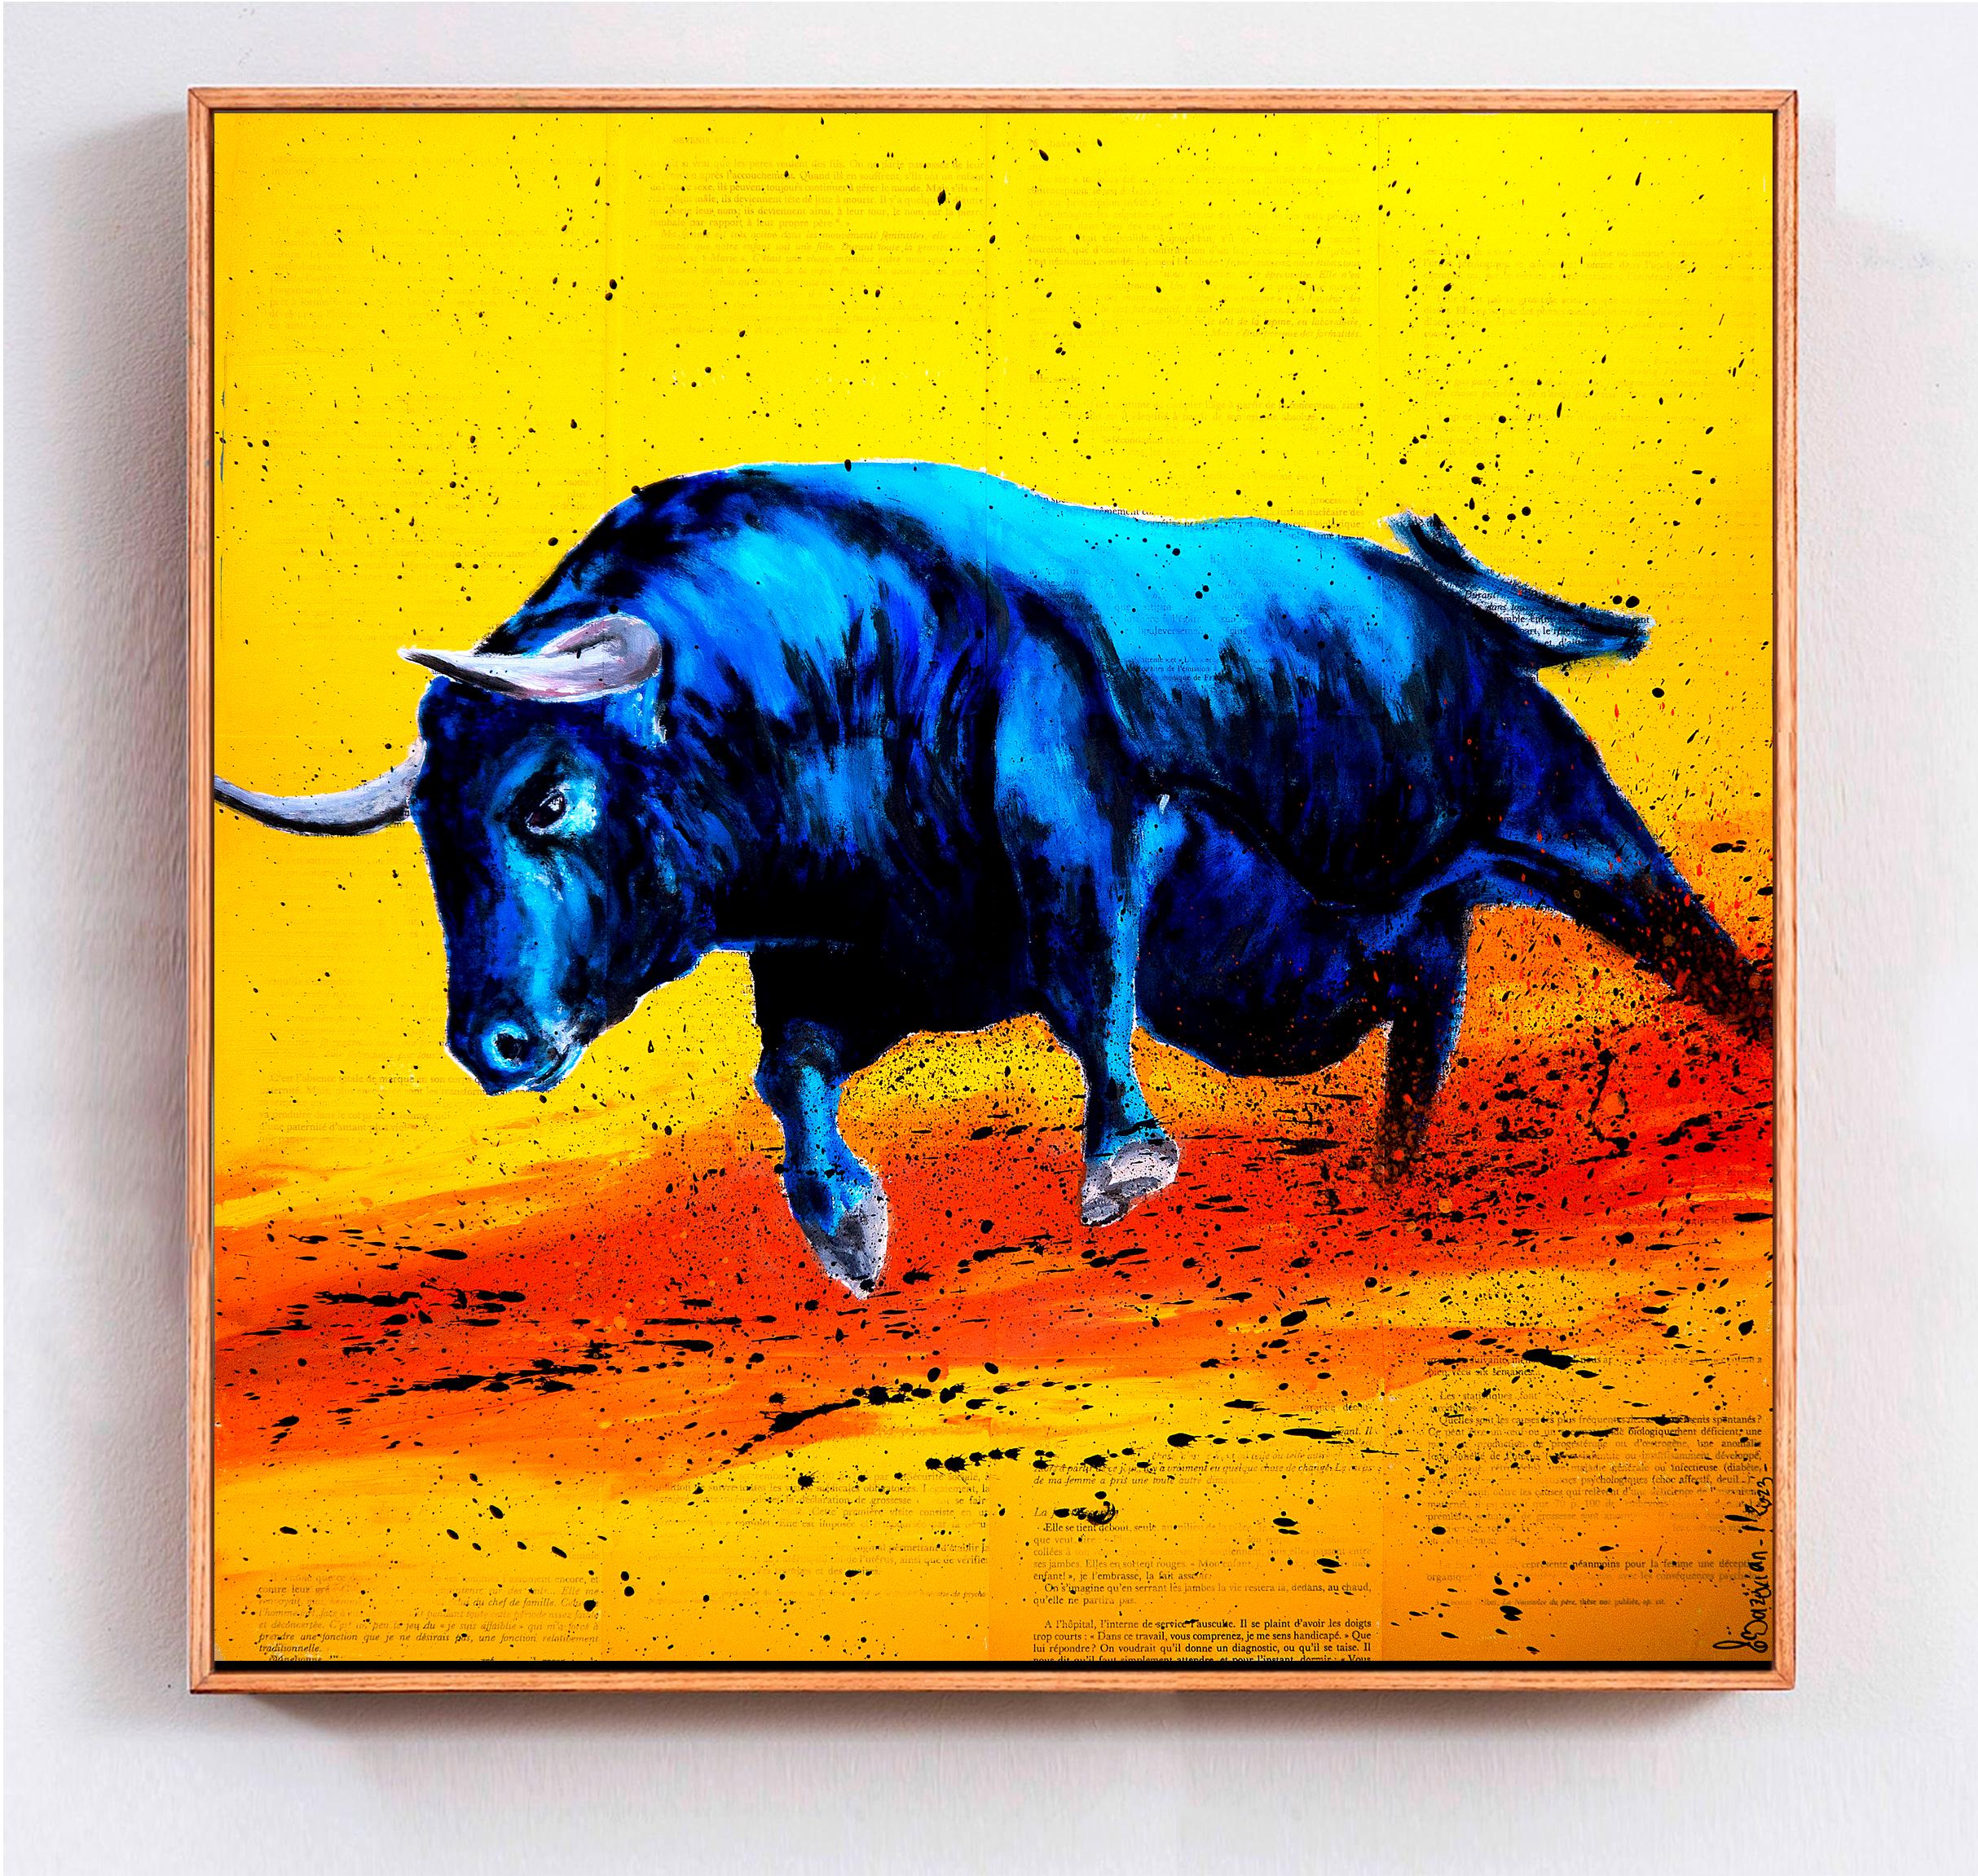 French School - Raging Bull V (Large) NSWE -  Oil painting Post Impressionist - Painting by Bazevian DelaCapuciniere